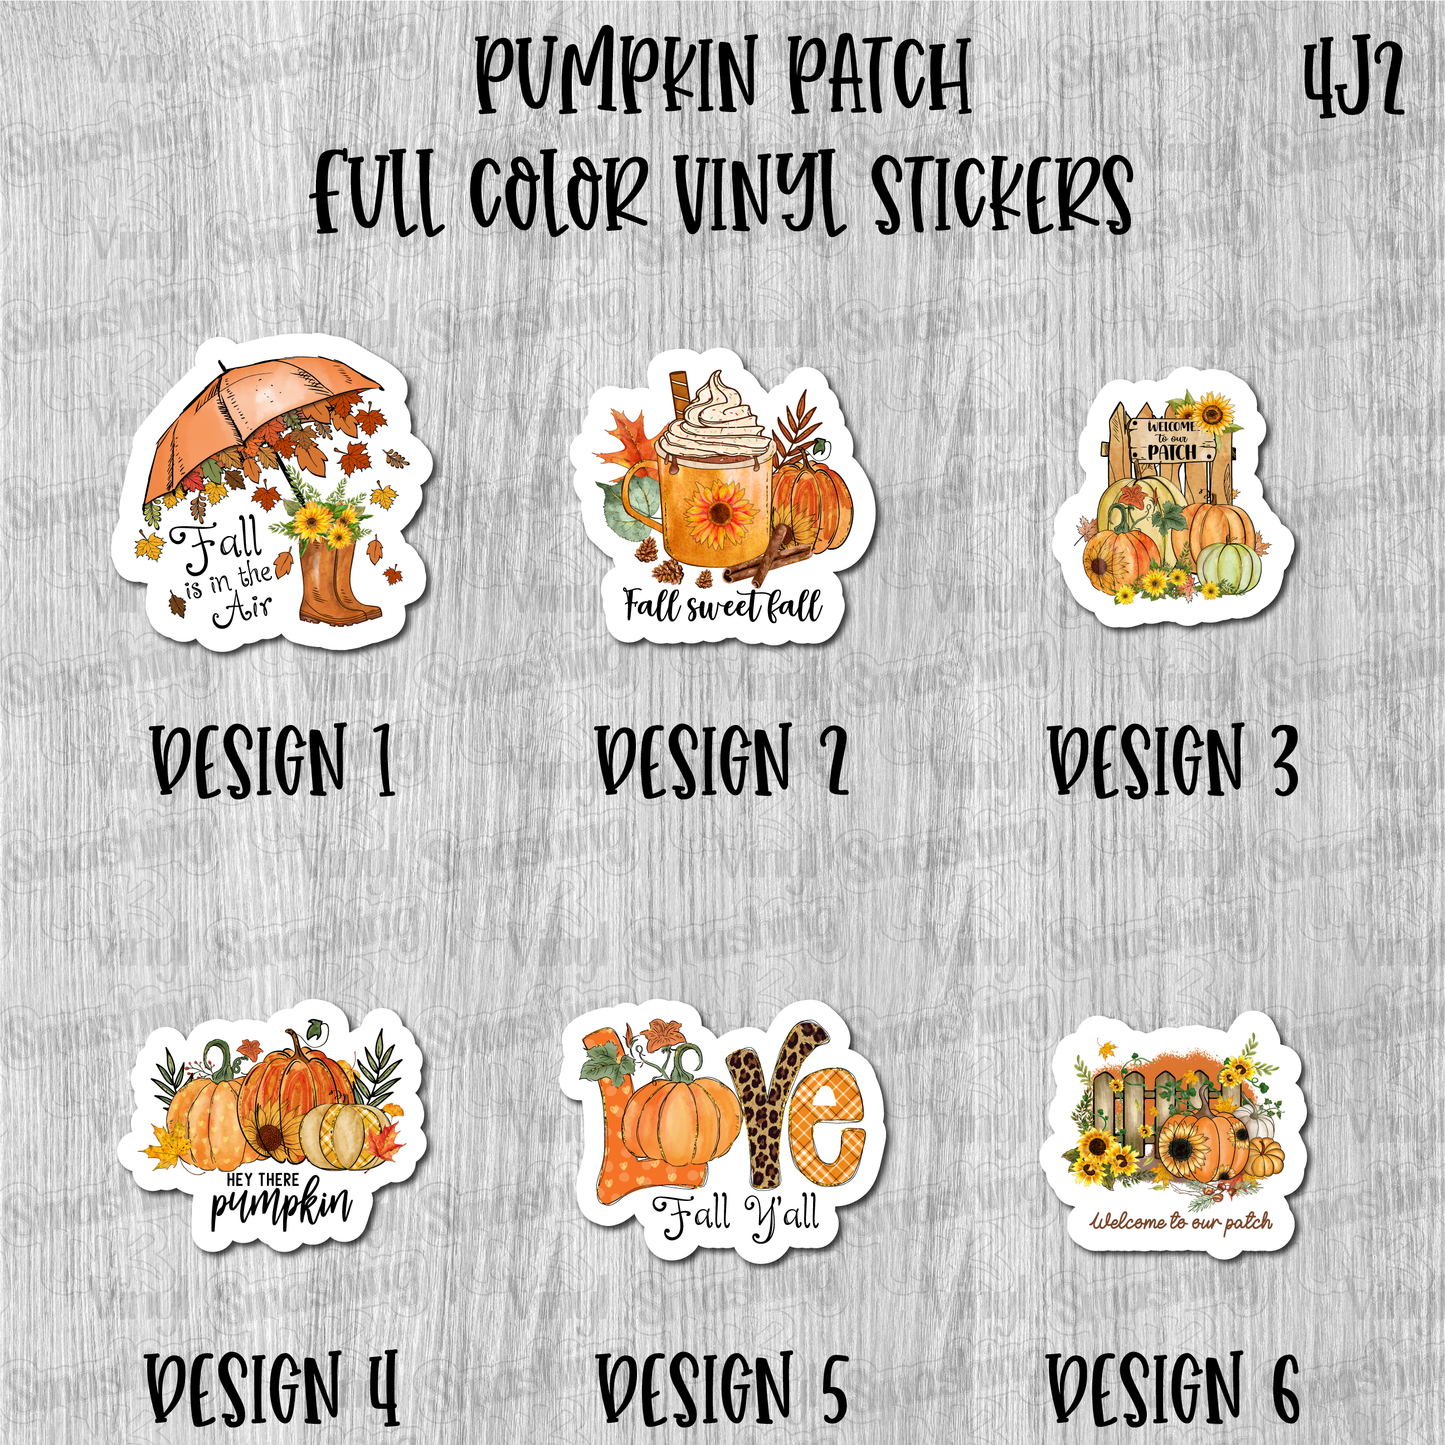 Pumpkin Patch - Full Color Vinyl Stickers (SHIPS IN 3-7 BUS DAYS)